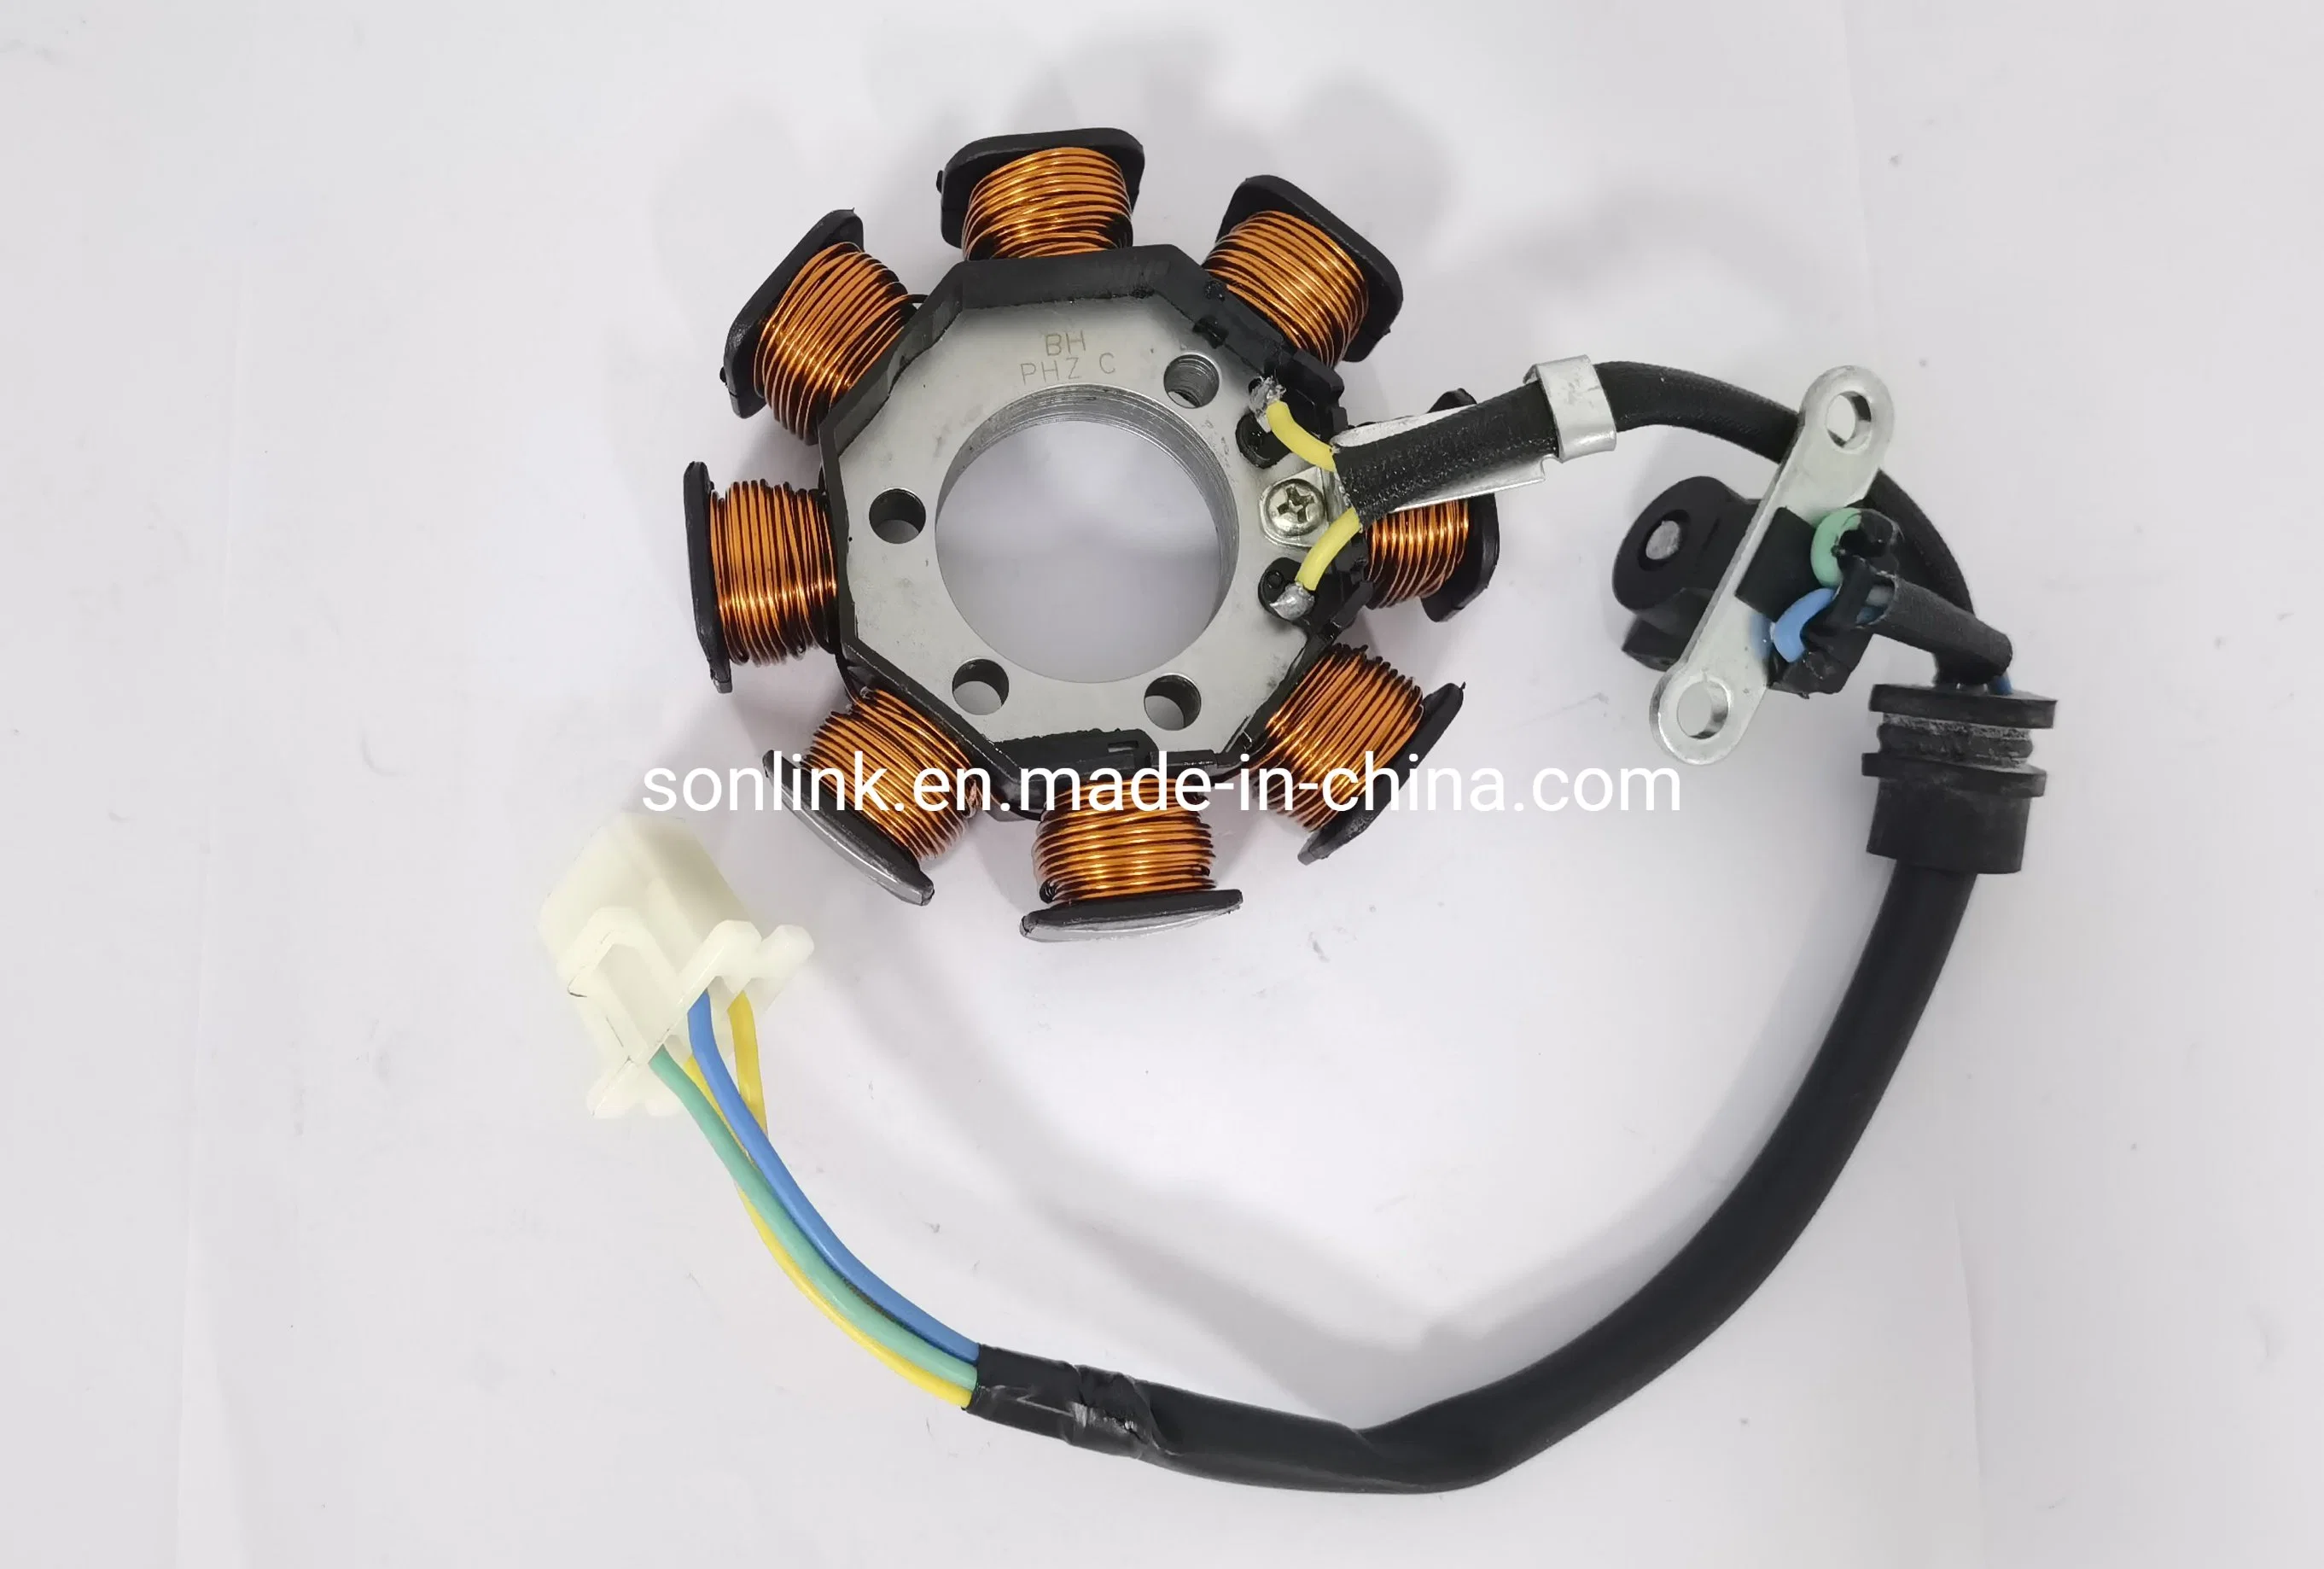 CG Cg125 150cc/200cc Kawasaki/Honda Electrical/Magneto Stator Coil Moto/Scooter/Dirtbike/Tricycle Motorcycle Accessories